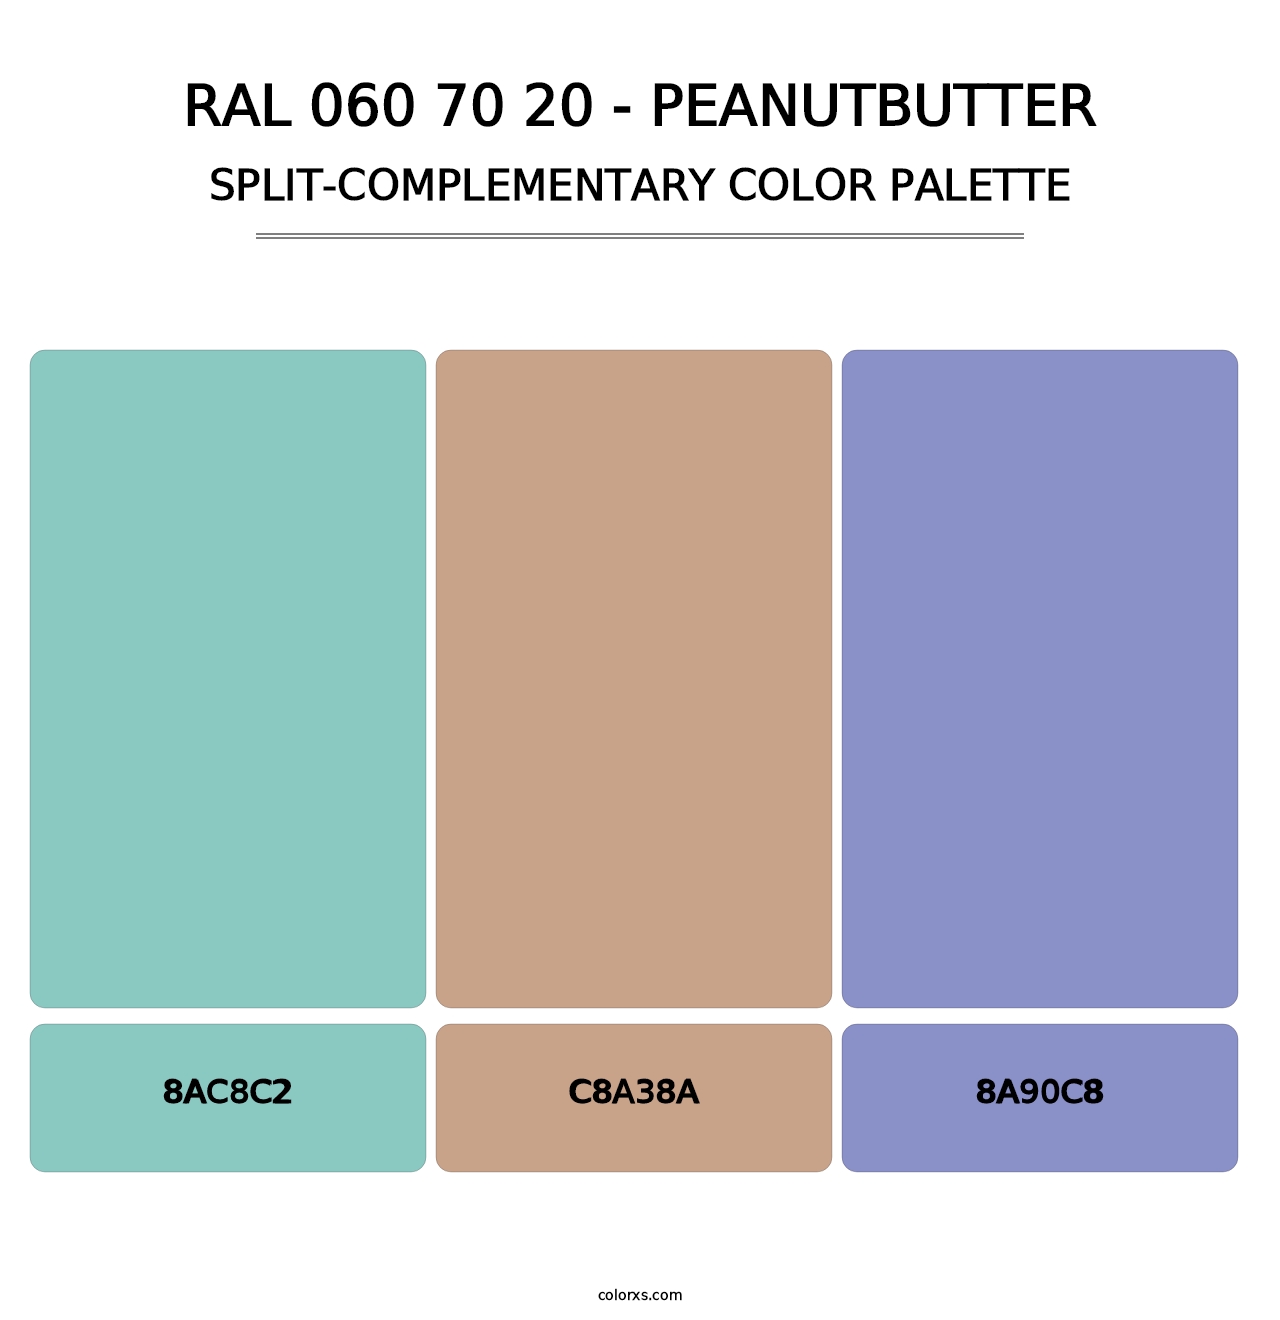 RAL 060 70 20 - Peanutbutter - Split-Complementary Color Palette